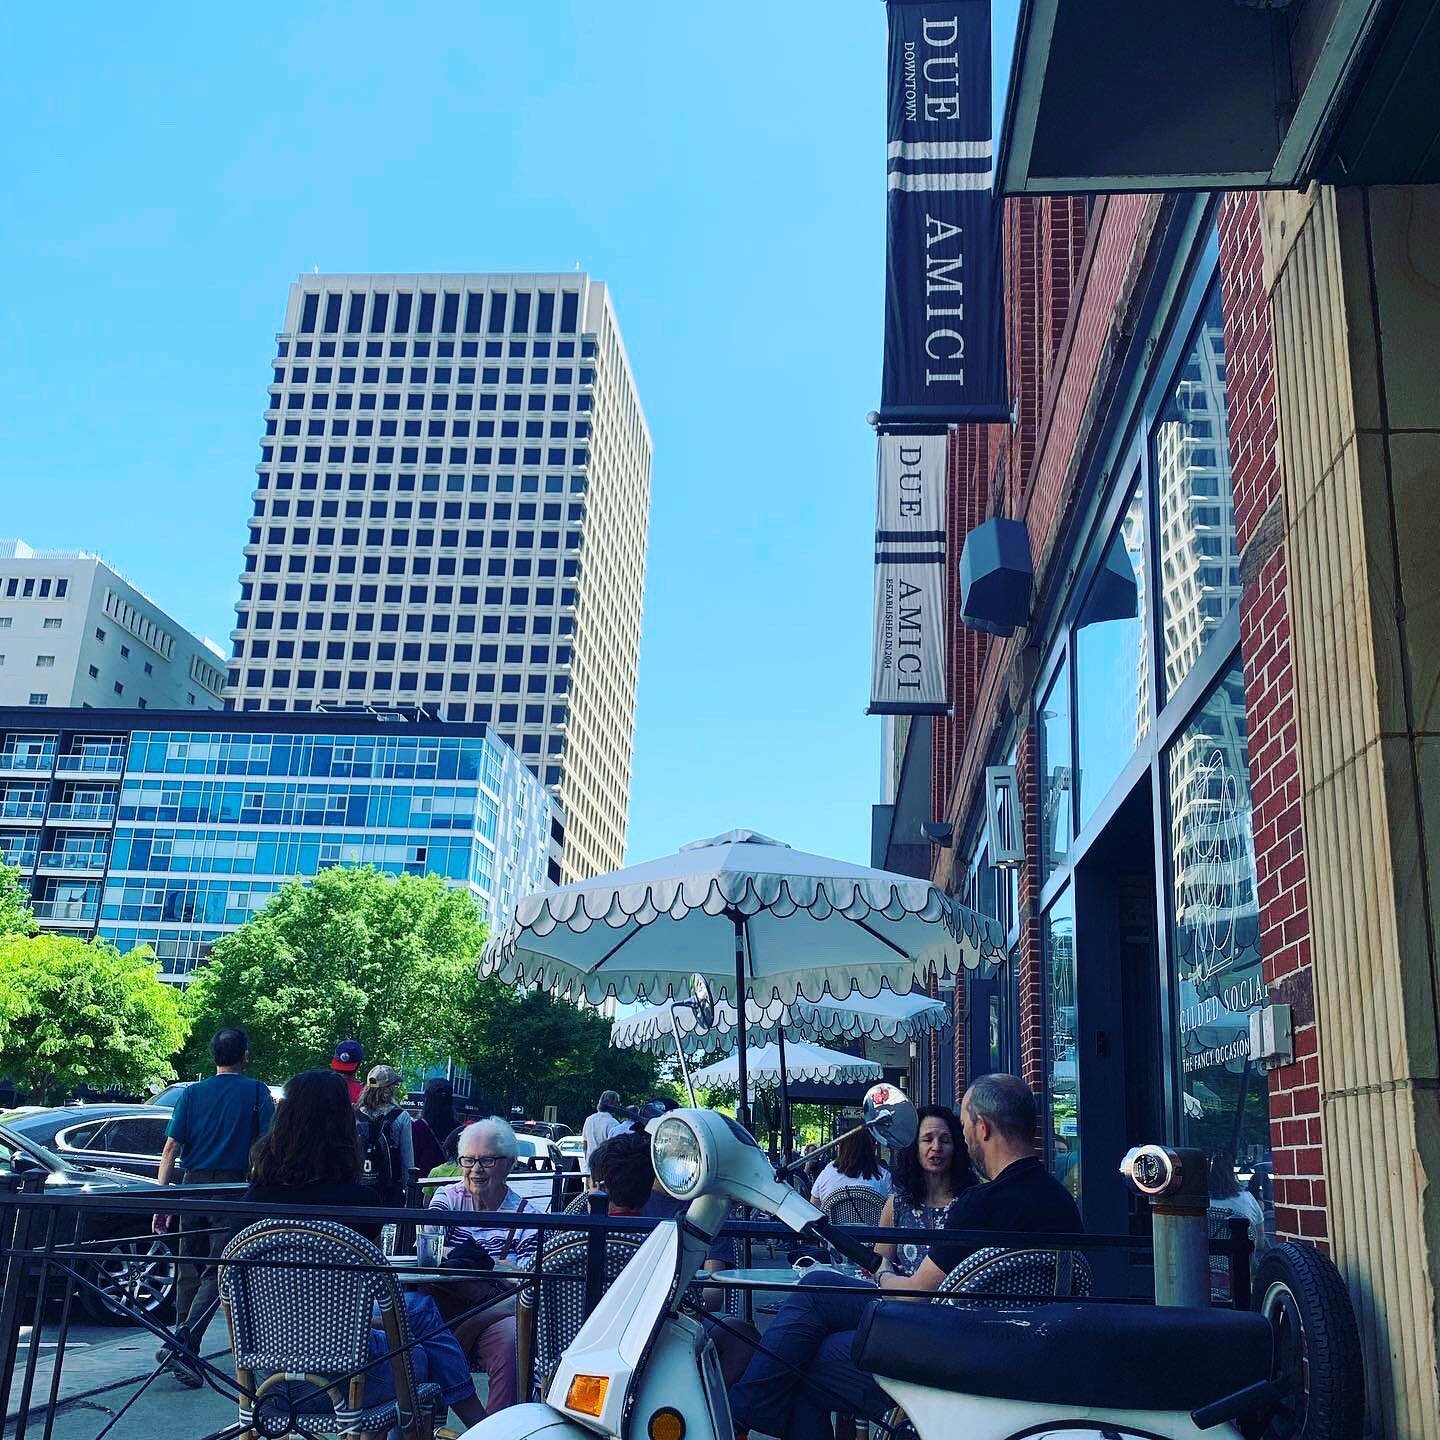 Hello spring, we&rsquo;re glad you&rsquo;re here! 

Join us for happy hour starting at 3pm and enjoy this beautiful day on our patio! 

&bull;
&bull;
&bull;
&bull;
&bull;
&bull;
#dueamici #downtowncolumbus #happyhour #patioseason #dinealfresco #cbuso